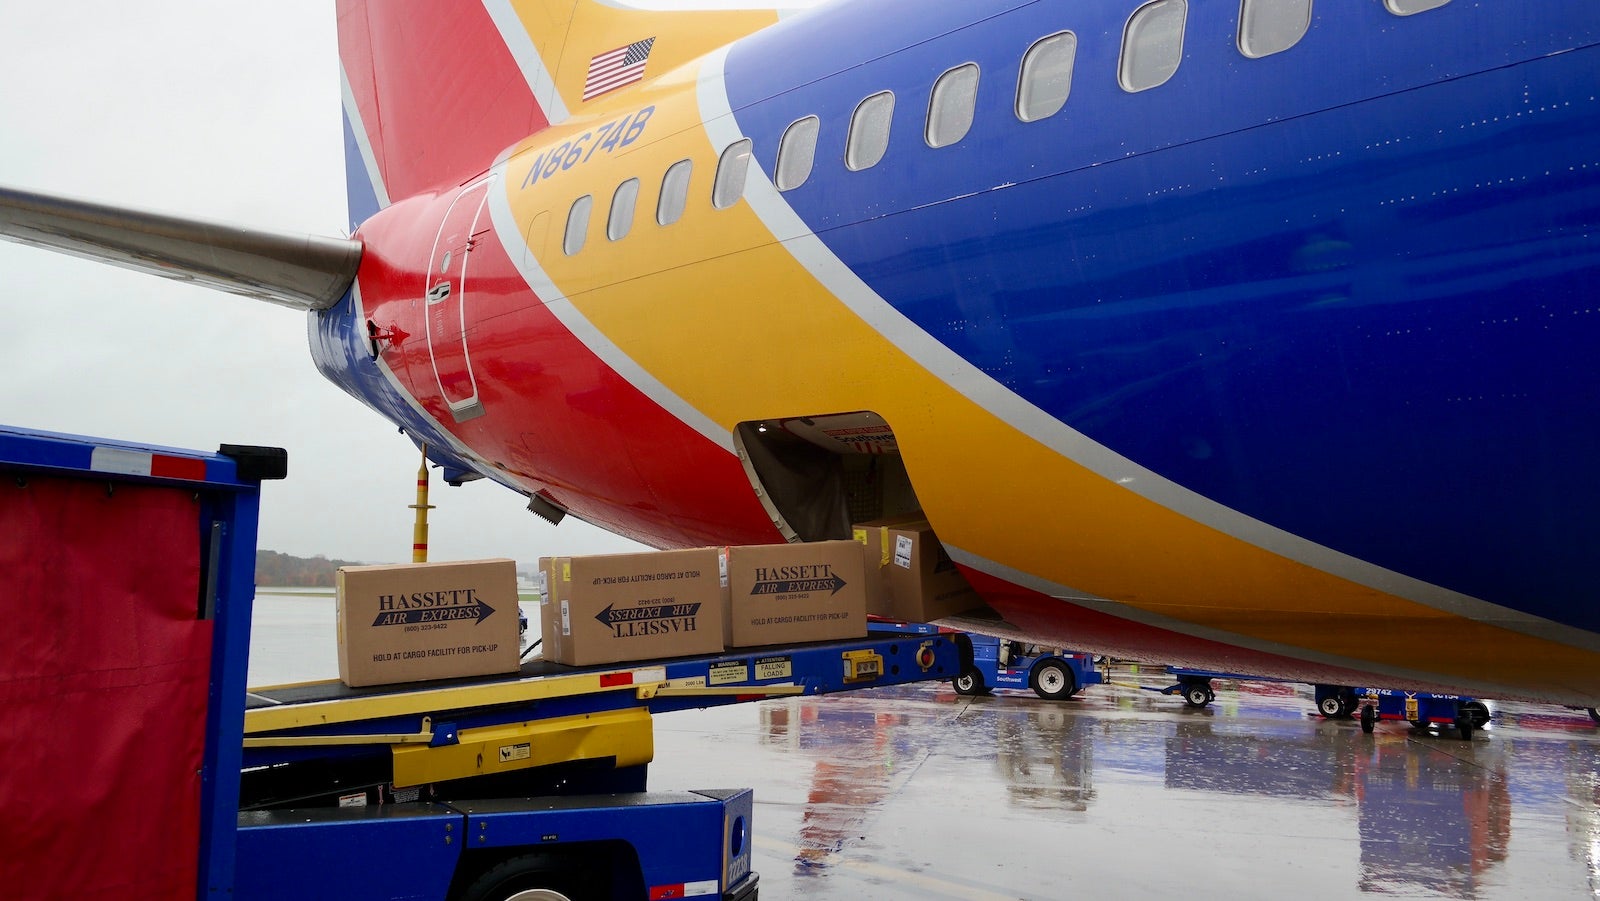 Southwest preps for holiday cargo at its Baltimore base - The Points Guy